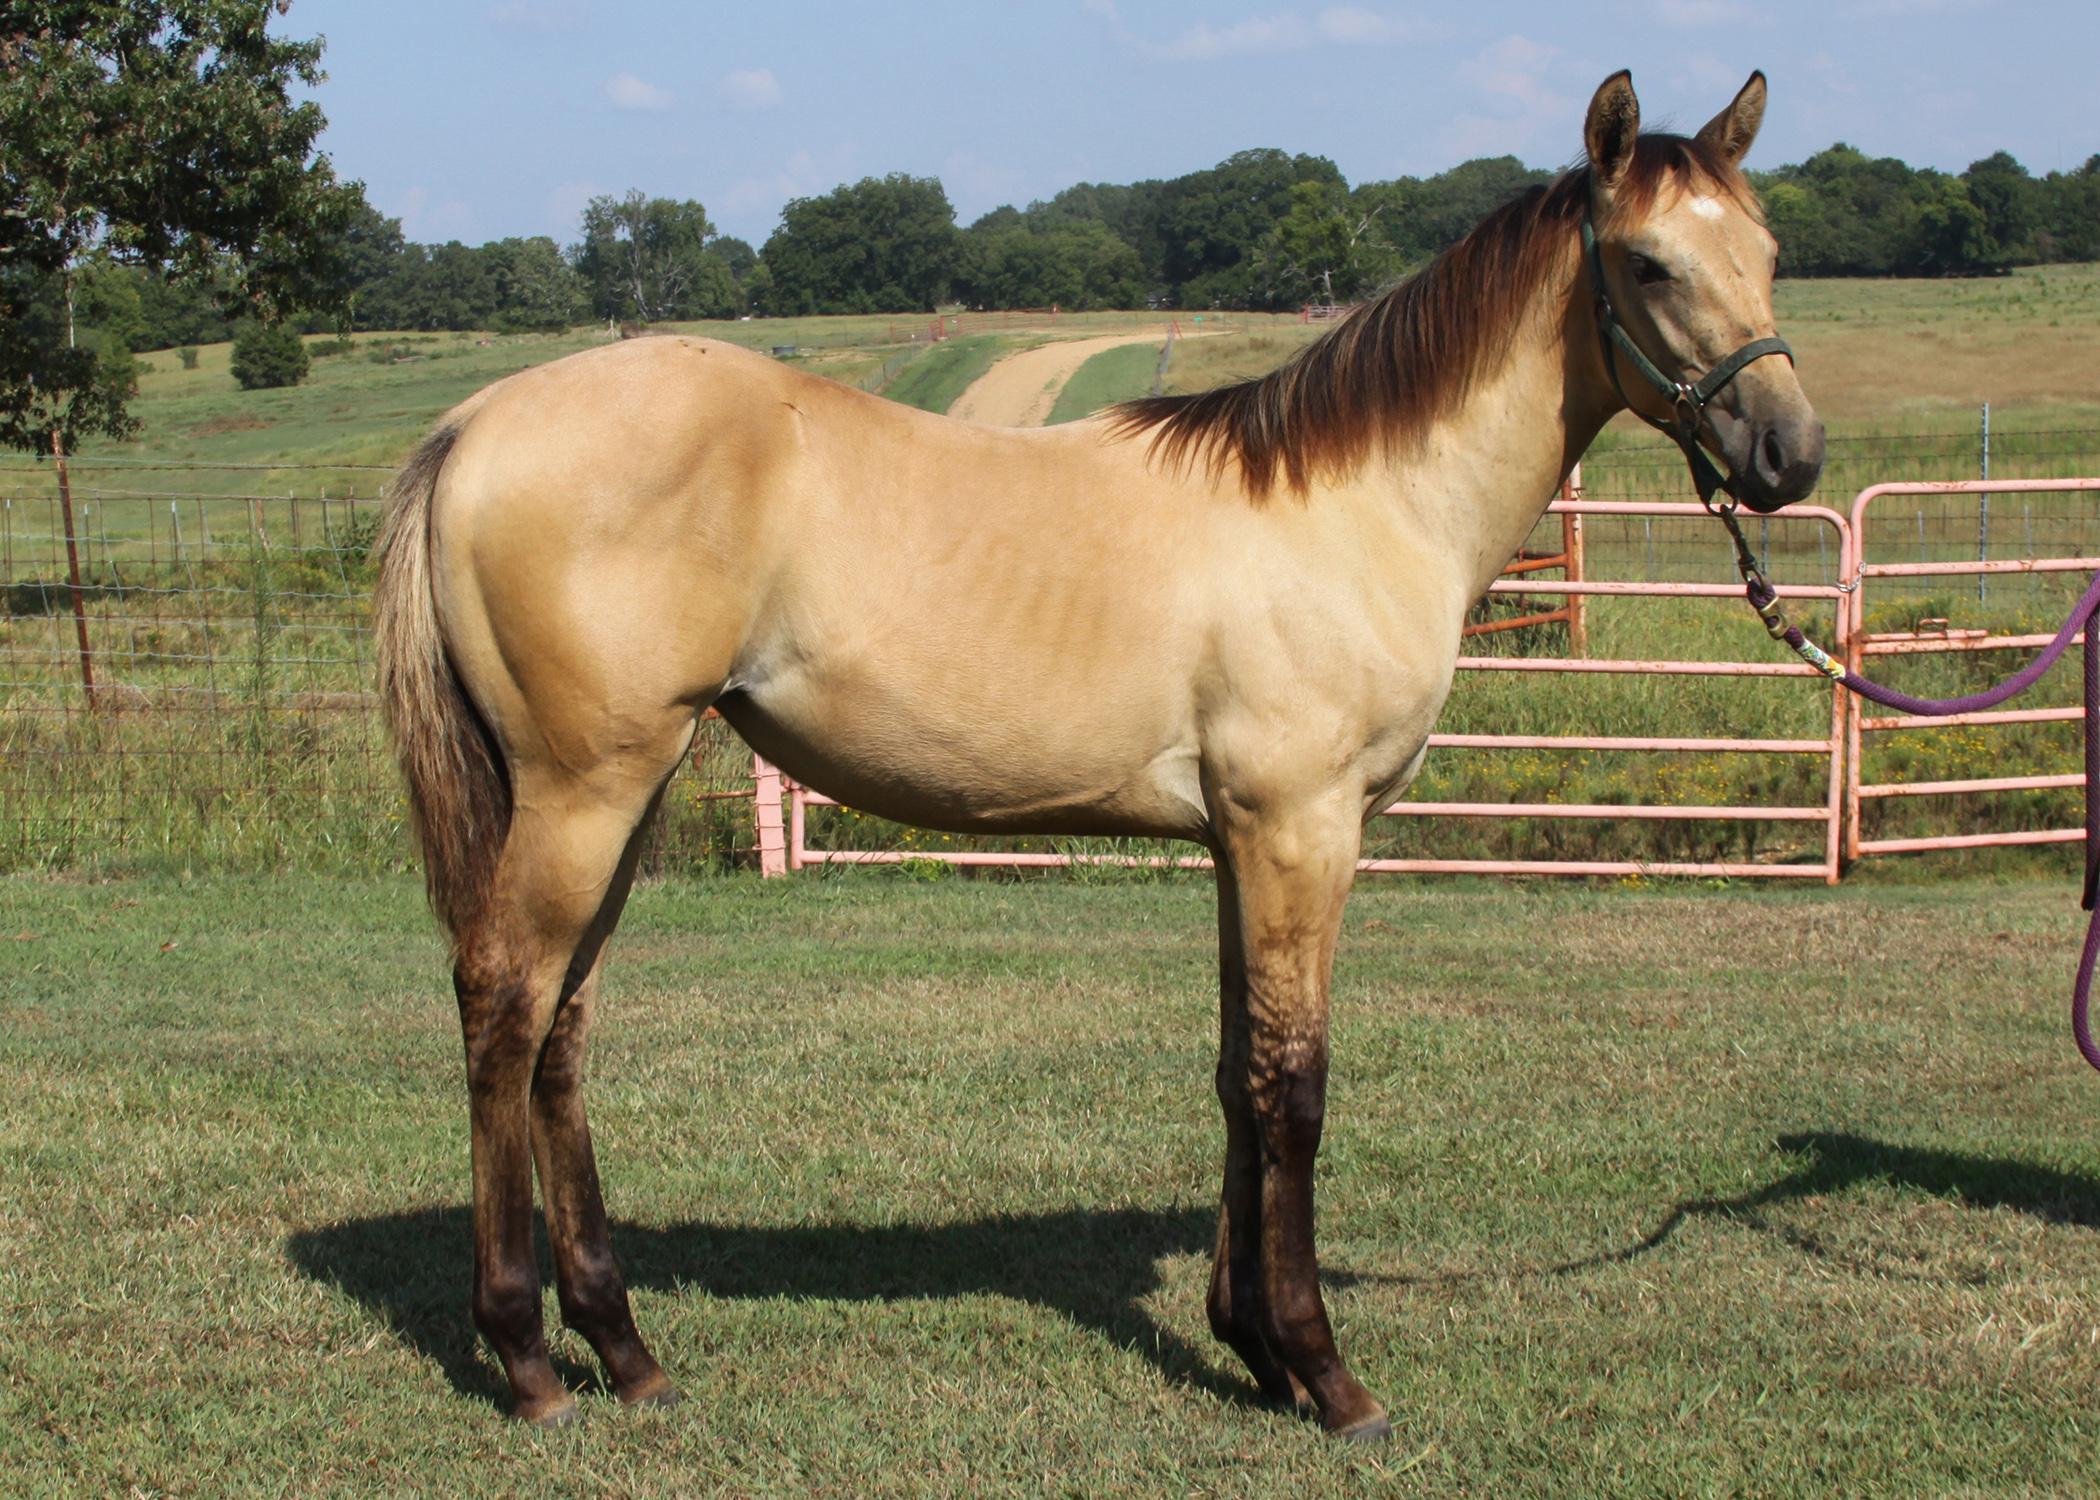 This filly, registered with the American Quarter Horse Association, is one of about 20 horses that will be included in the Mississippi State University horse auction in November. (Submitted Photo)